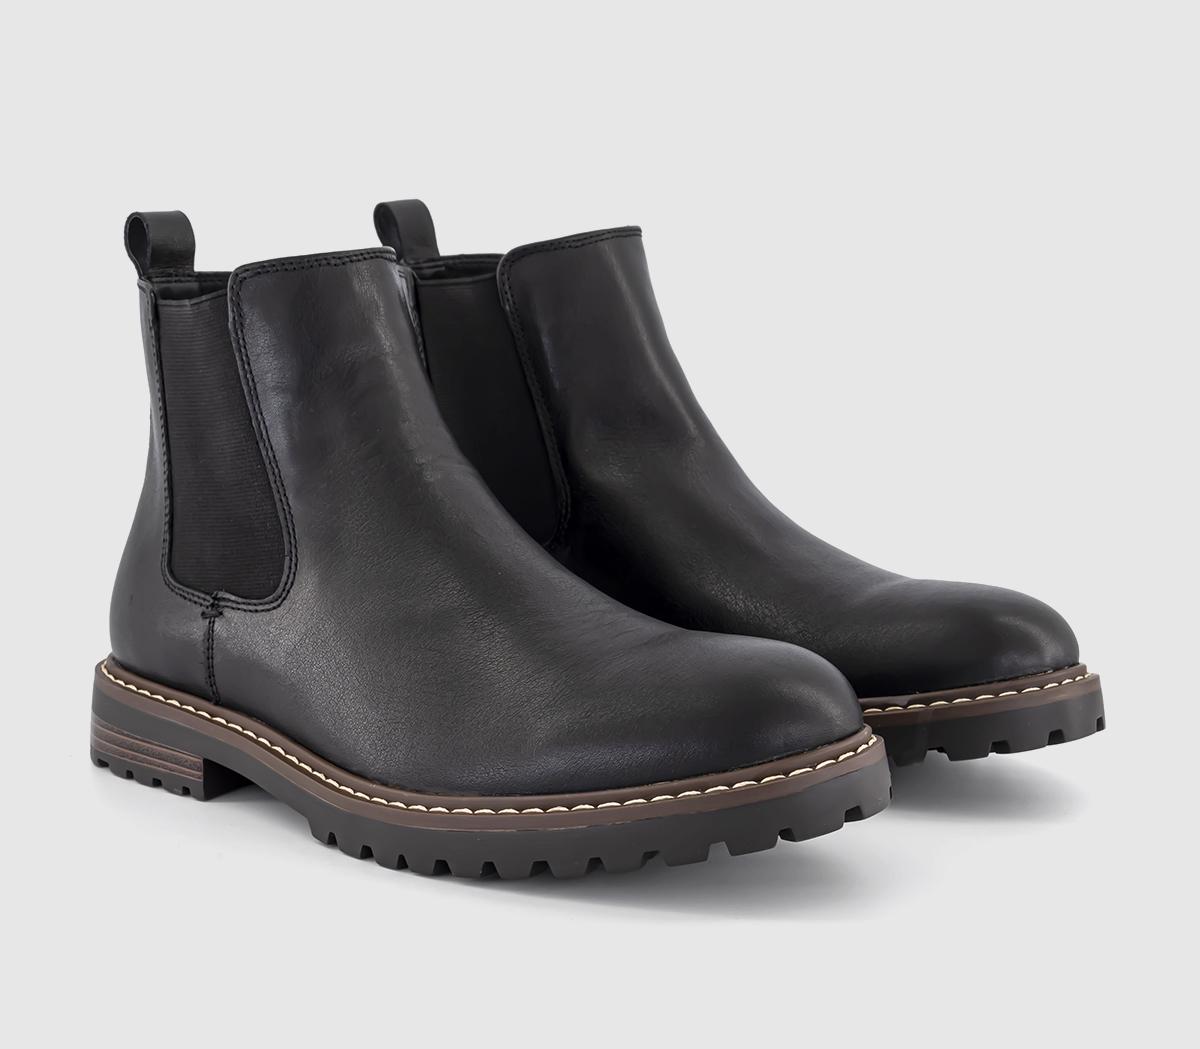 OFFICE Burford Cleated Chelsea Boots Black Leather - Men’s Boots